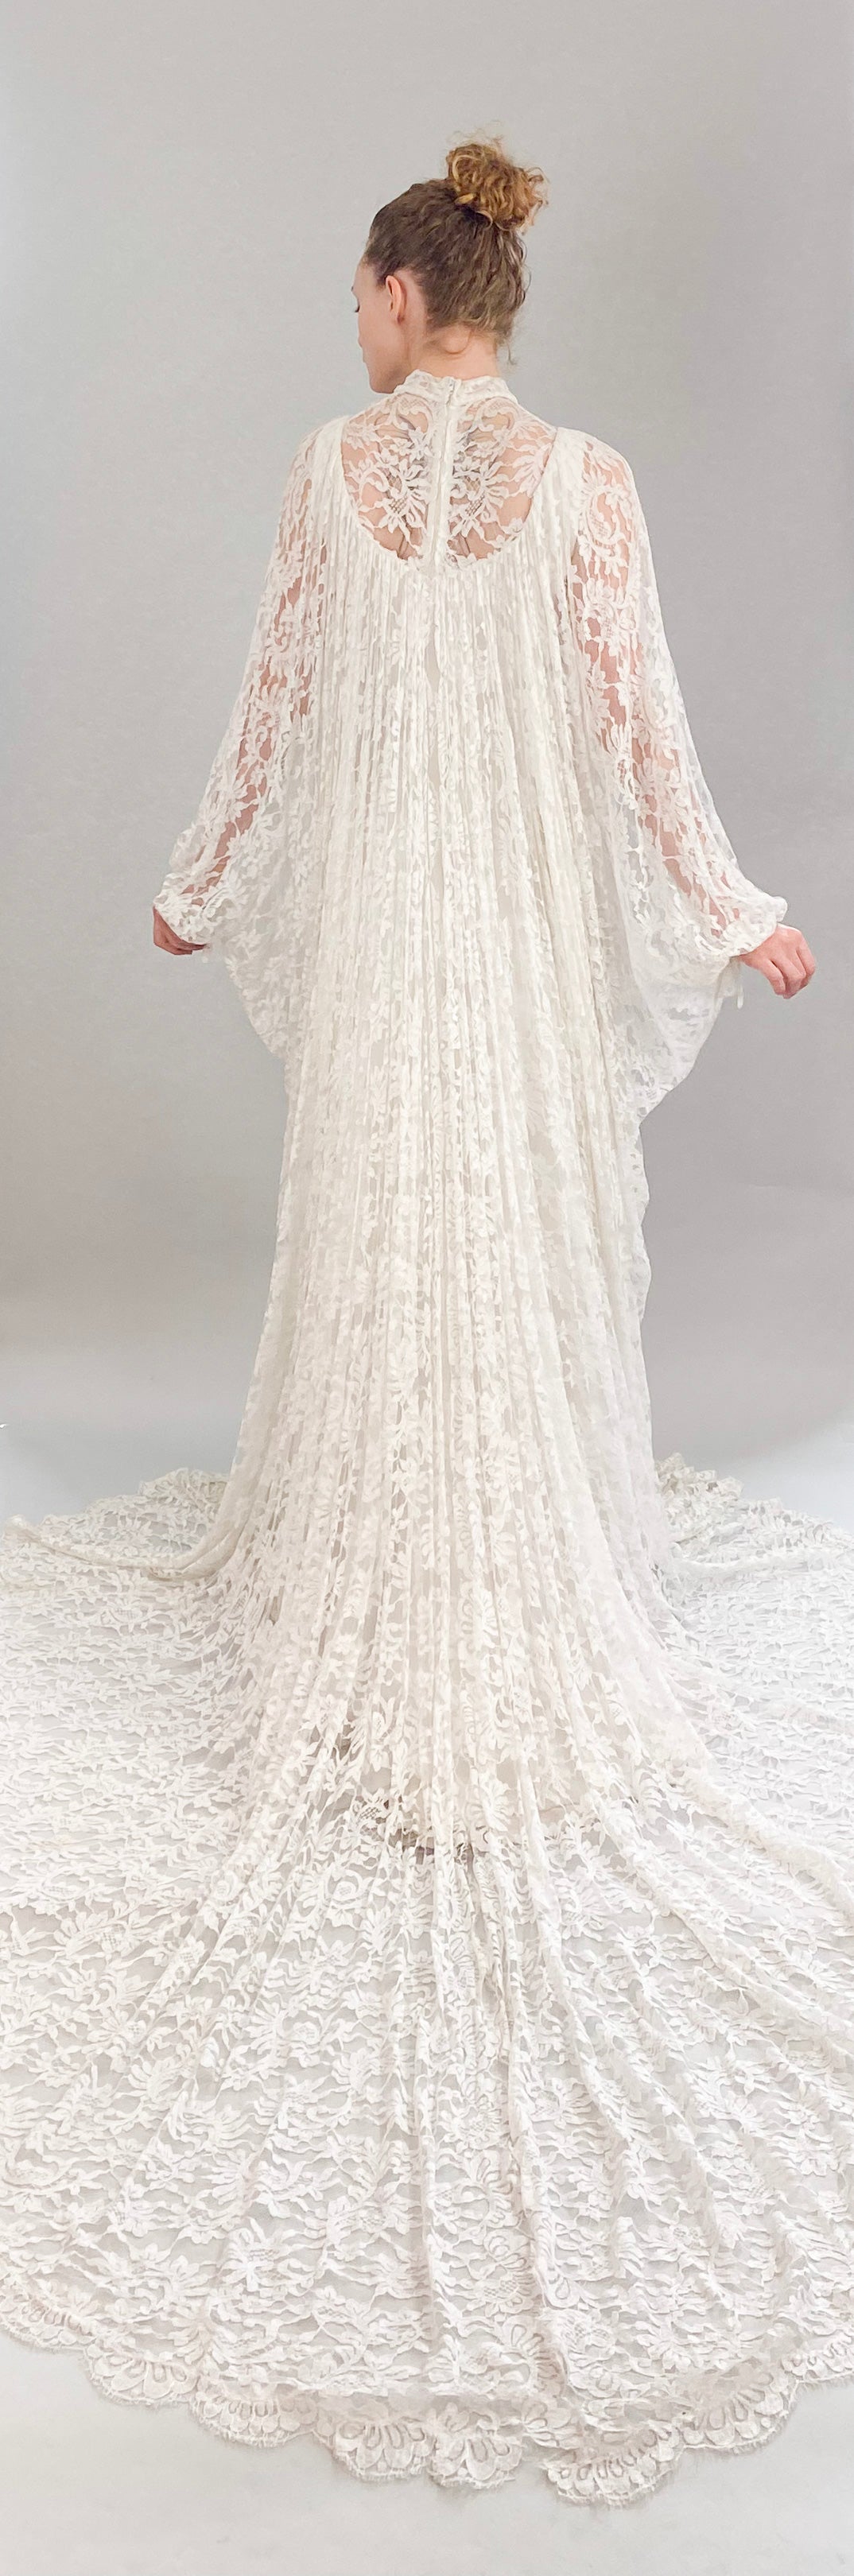 Vintage White Lace Bridal Gown with Batwing Sleeves & Train